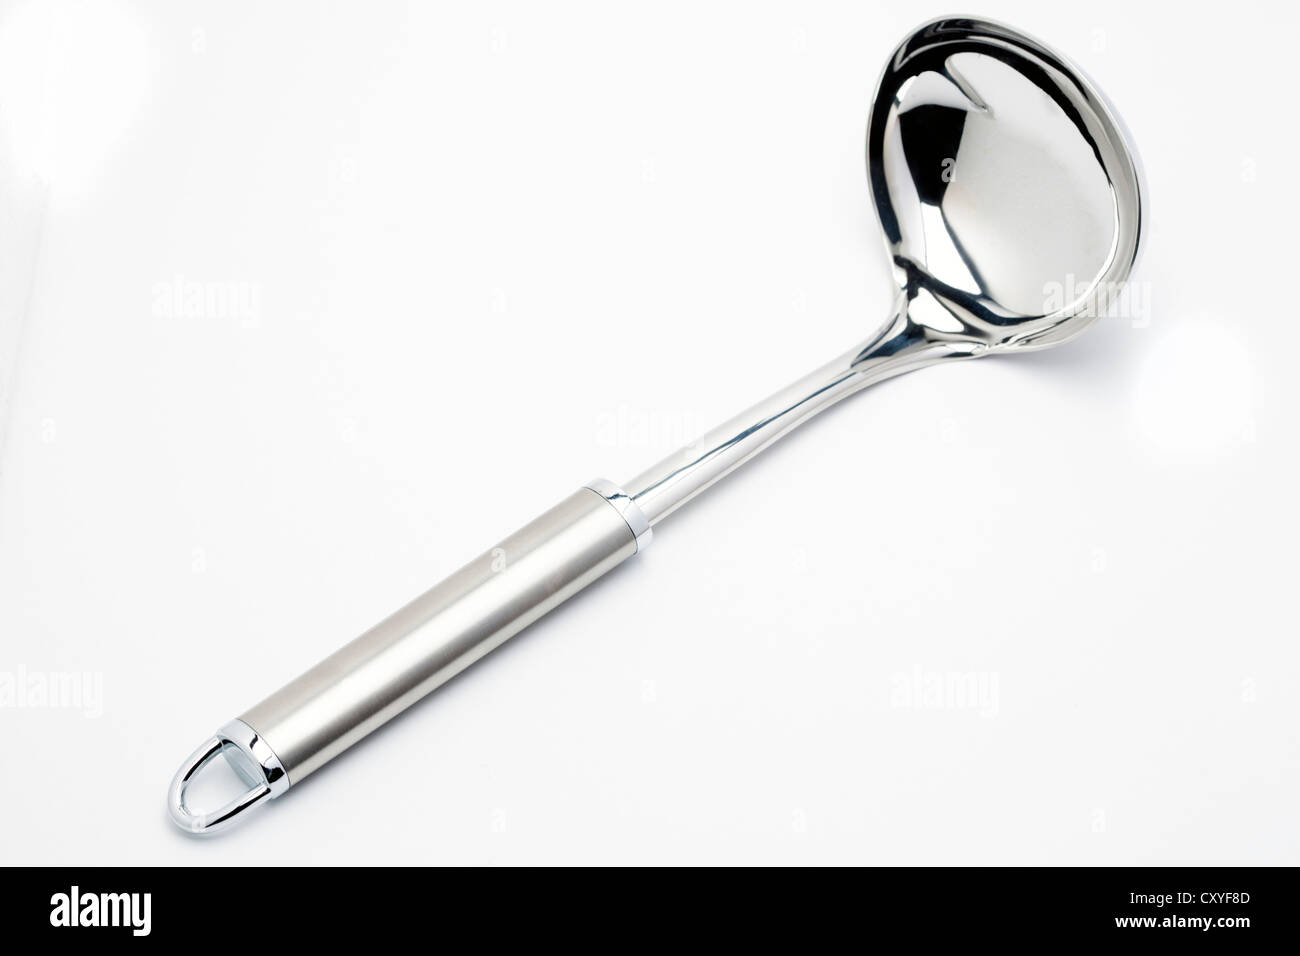 Stainless steel Ladle on White background Stock Photo